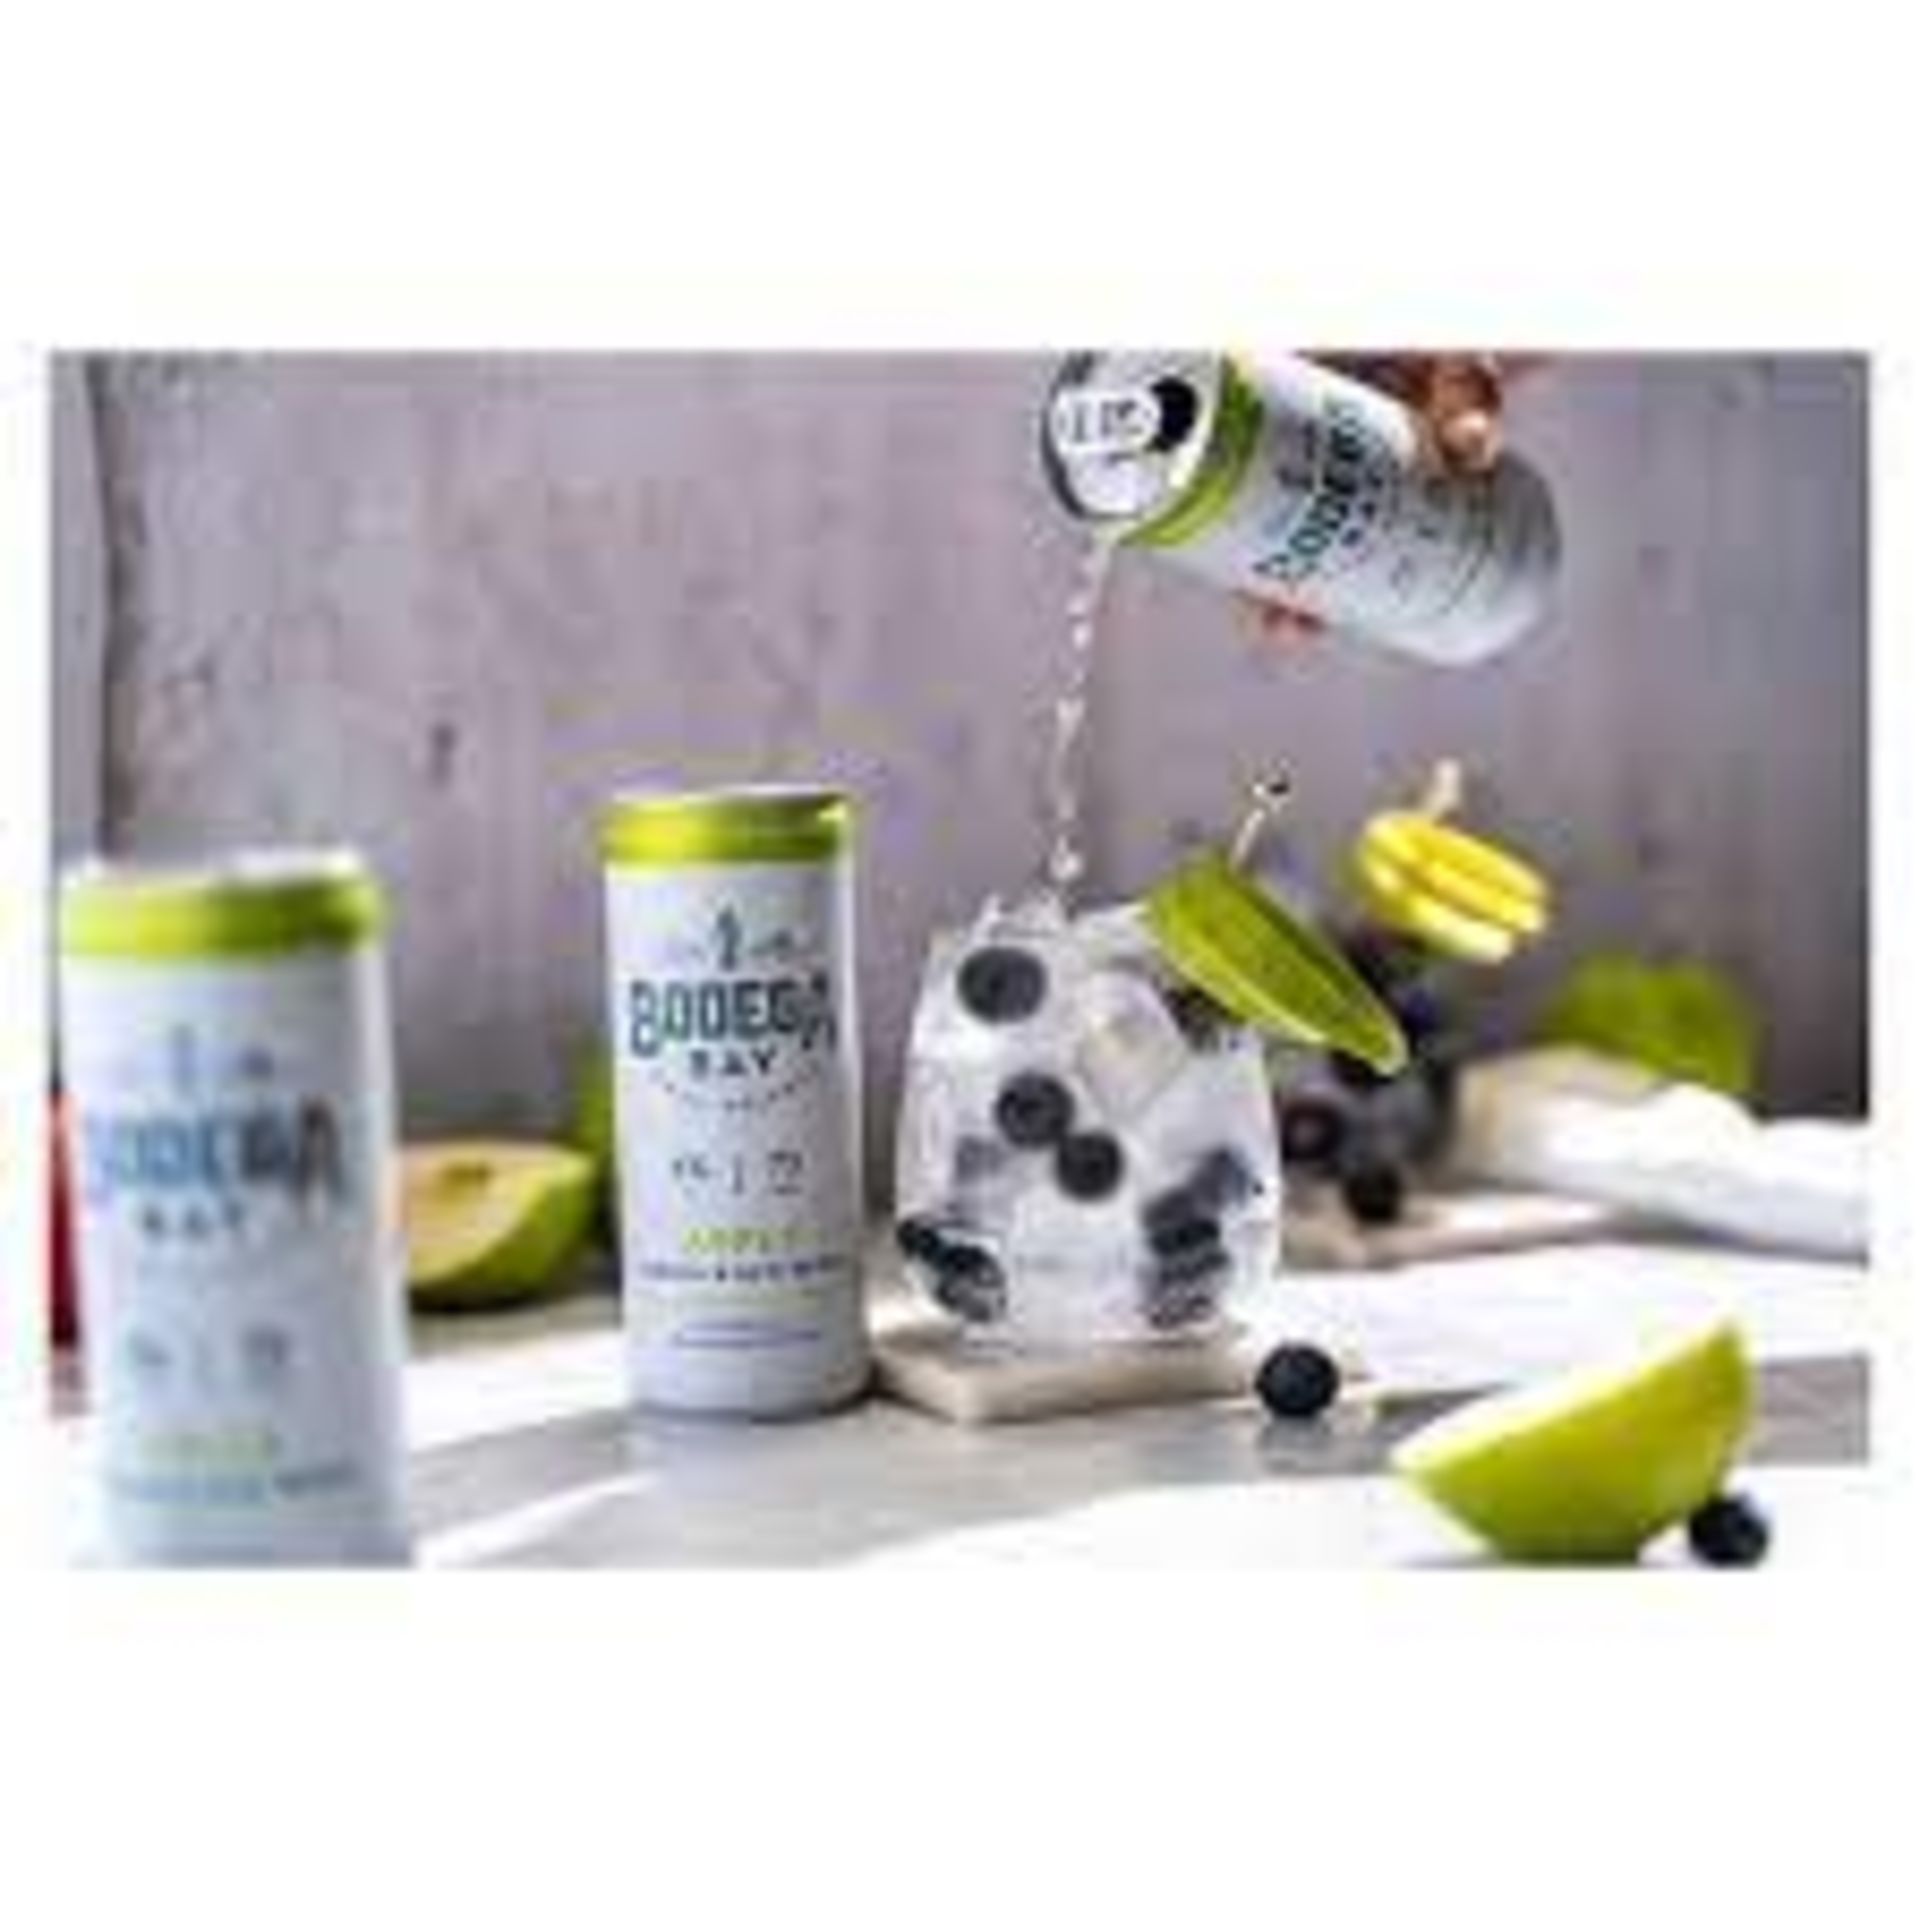 360 x Cans of Bodega Bay Hard Seltzer 250ml Alcoholic Sparkling Water Drinks - Various Flavours - Image 18 of 20